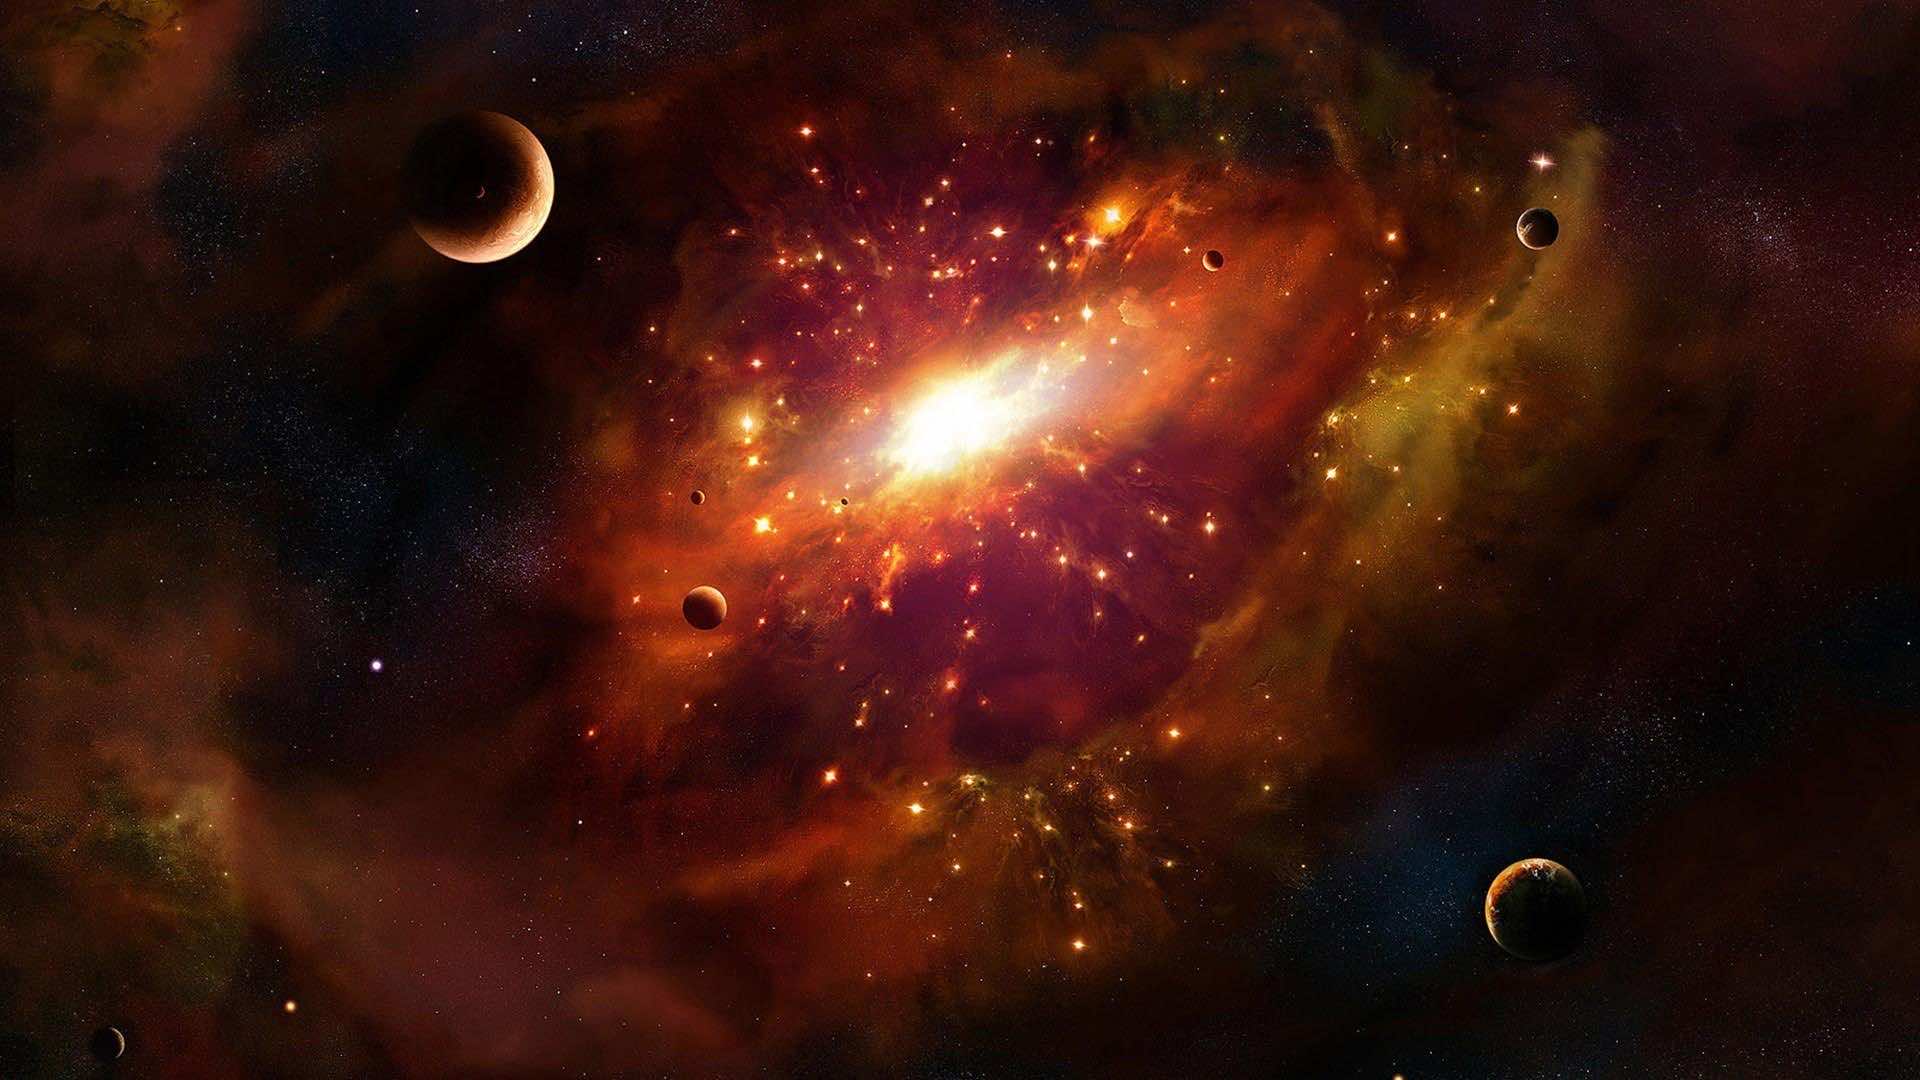 35 Hd Galaxy Wallpapers For Free Download